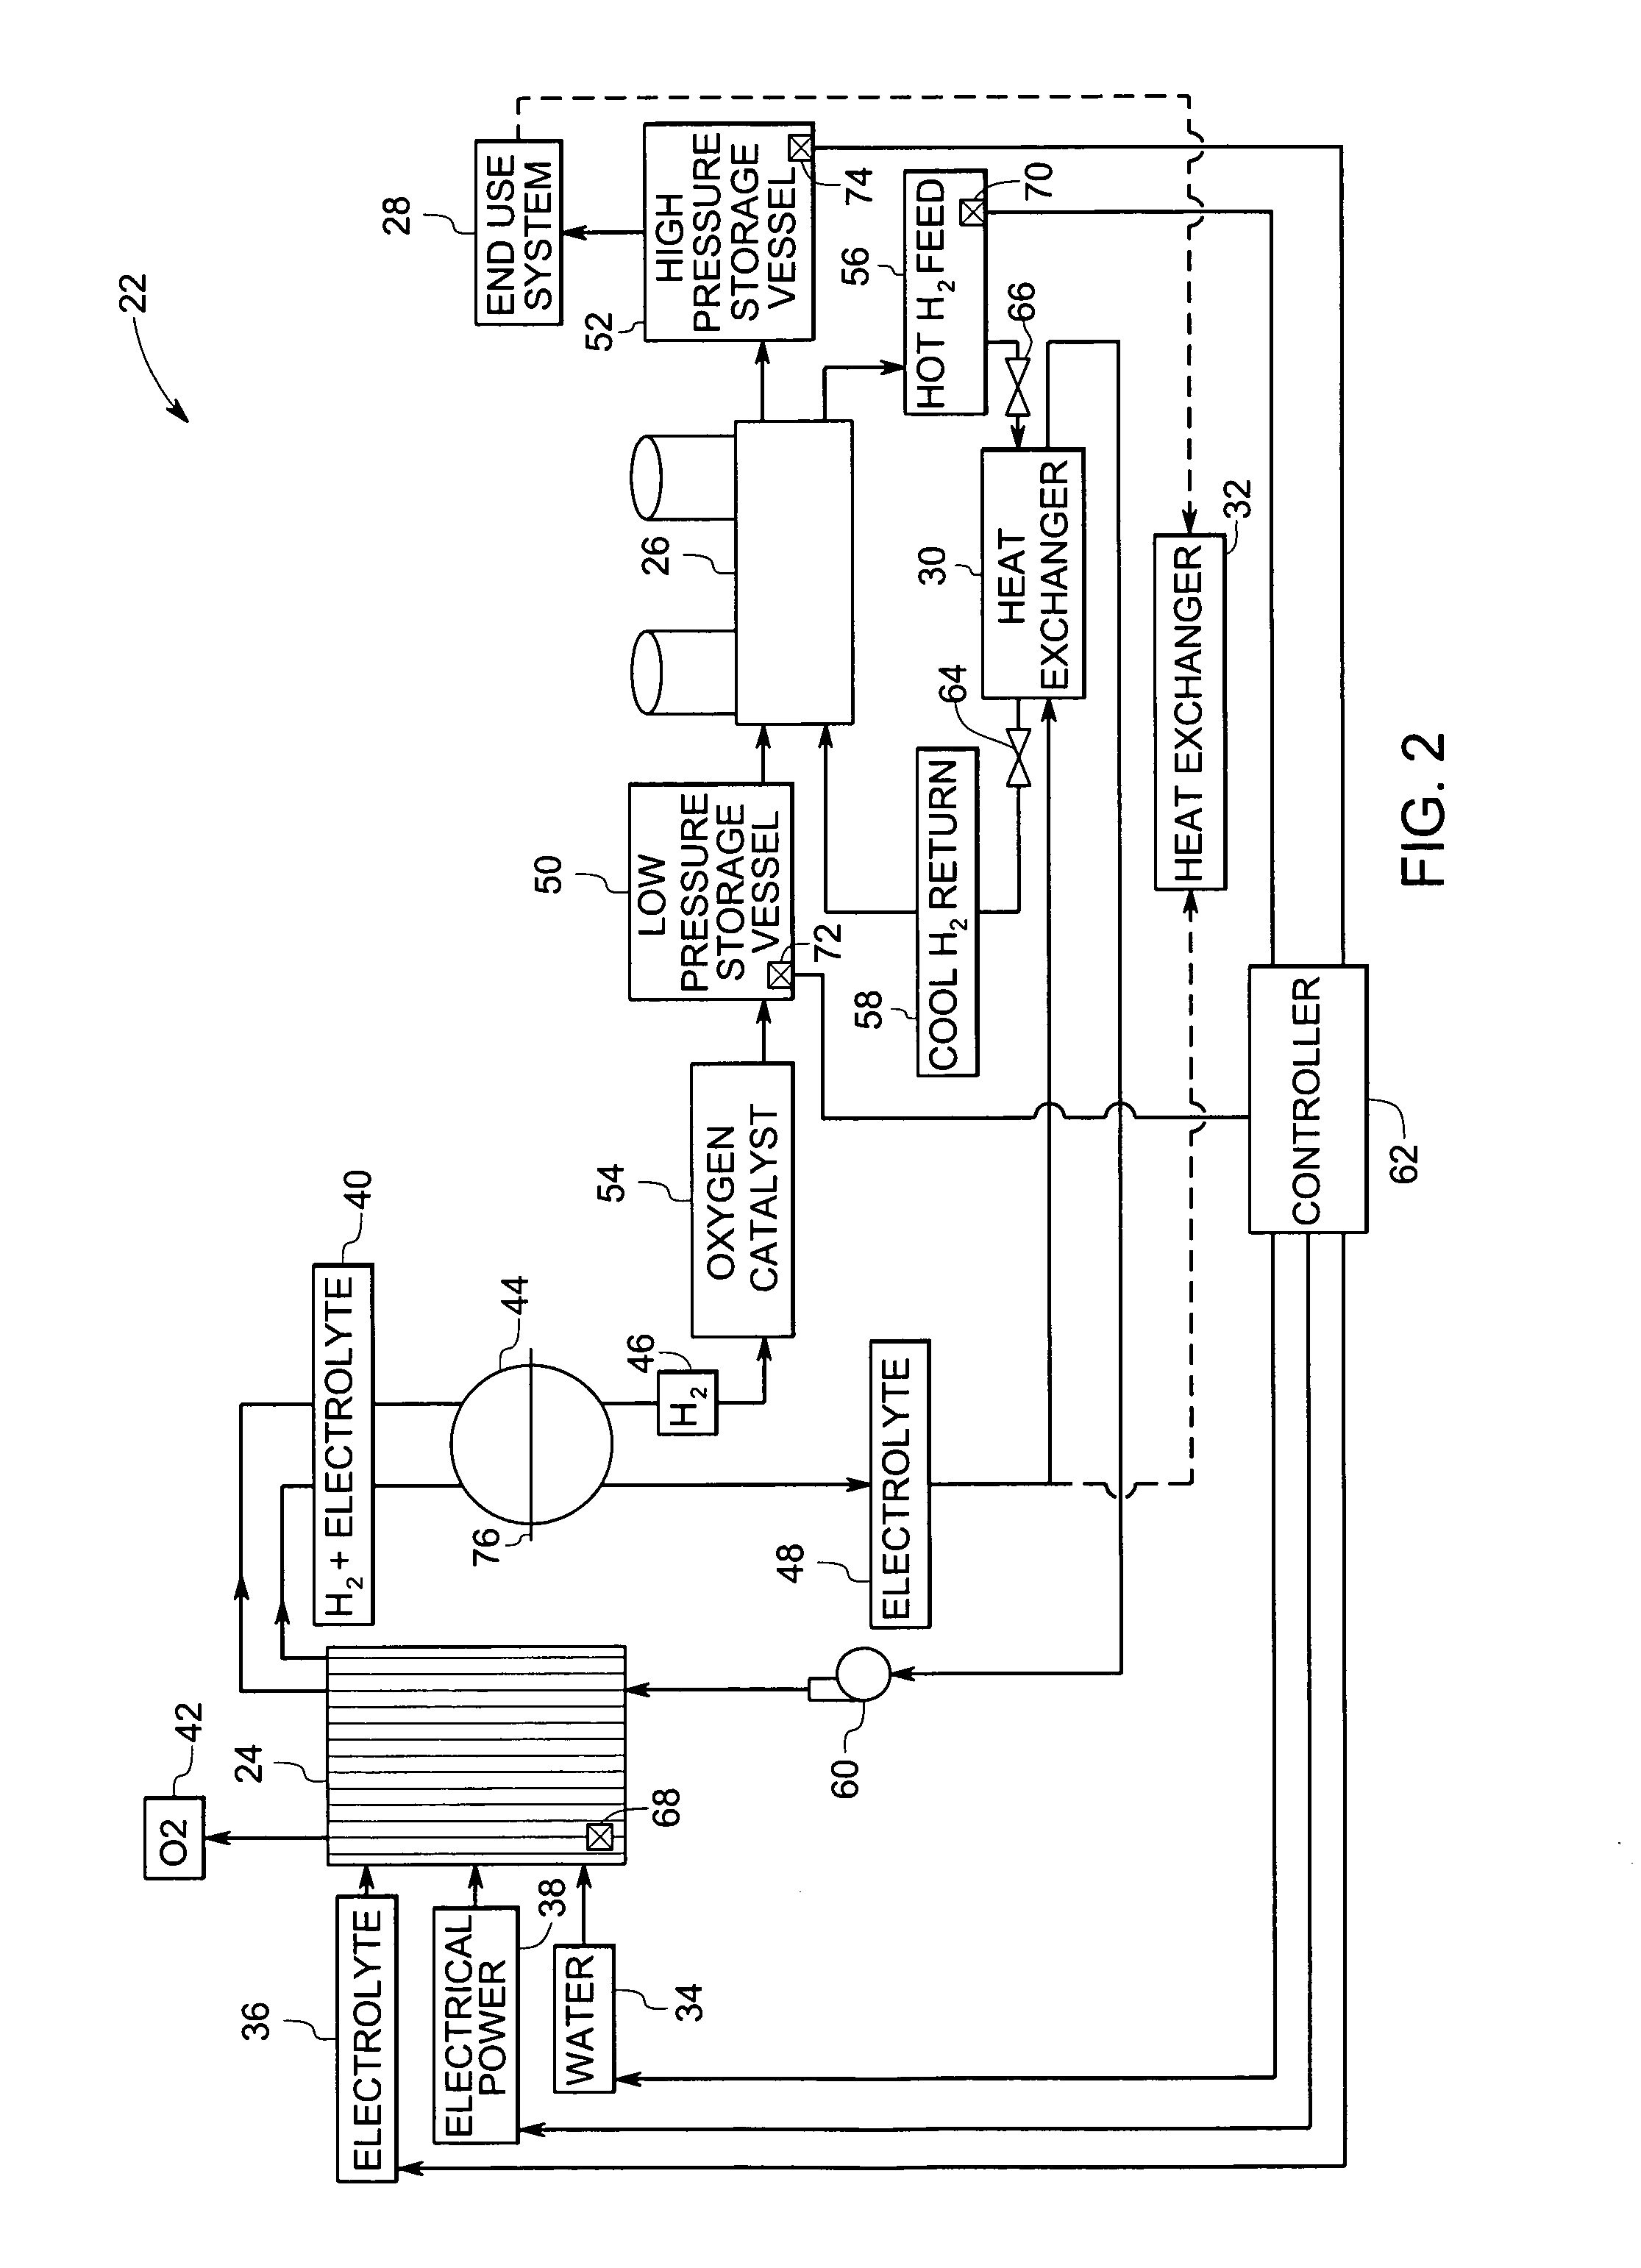 Integrated hydrogen production and processing system and method of operation